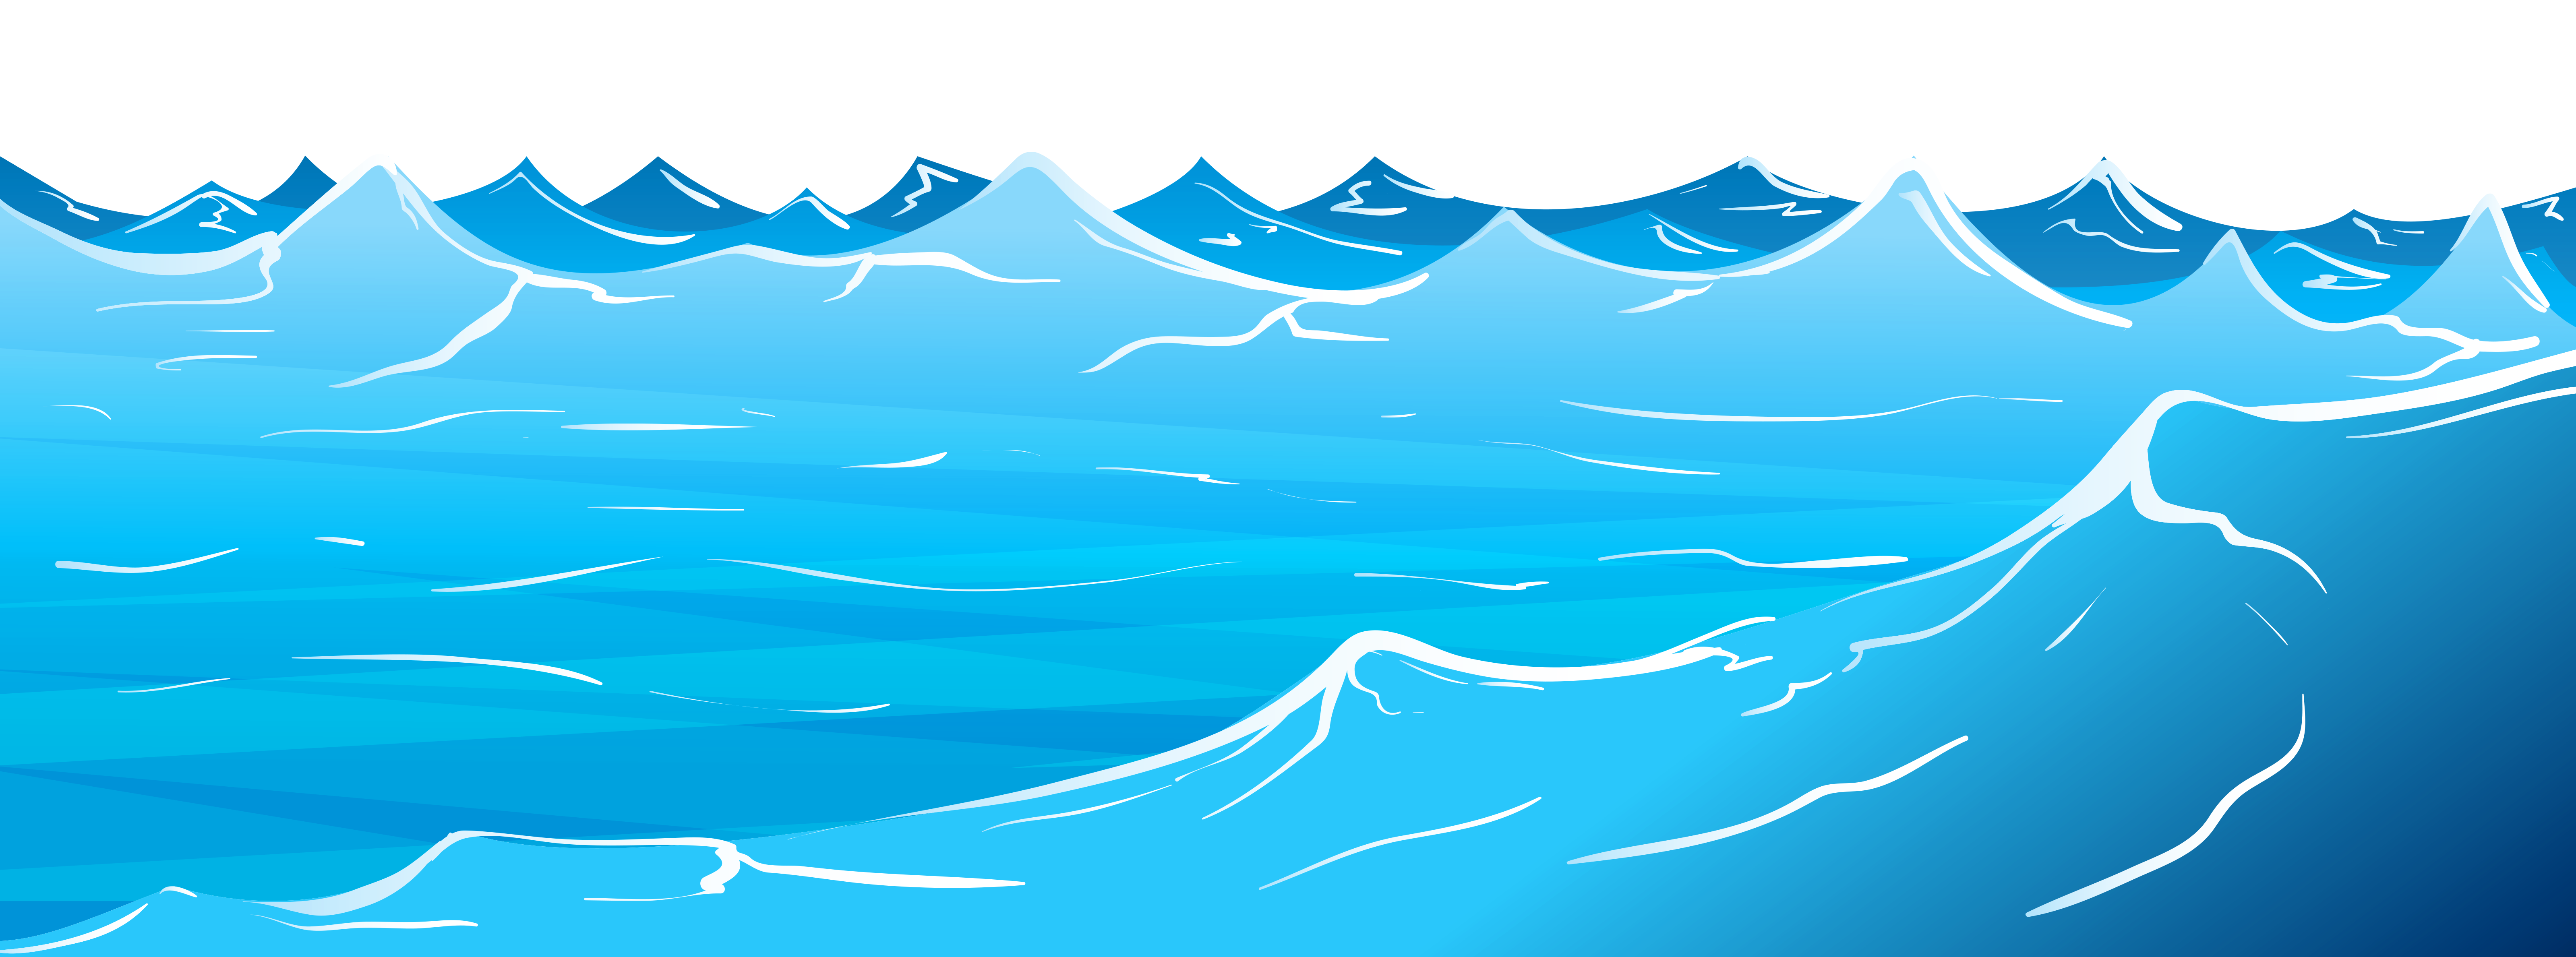 What is in ocean. Day clipart nighttime